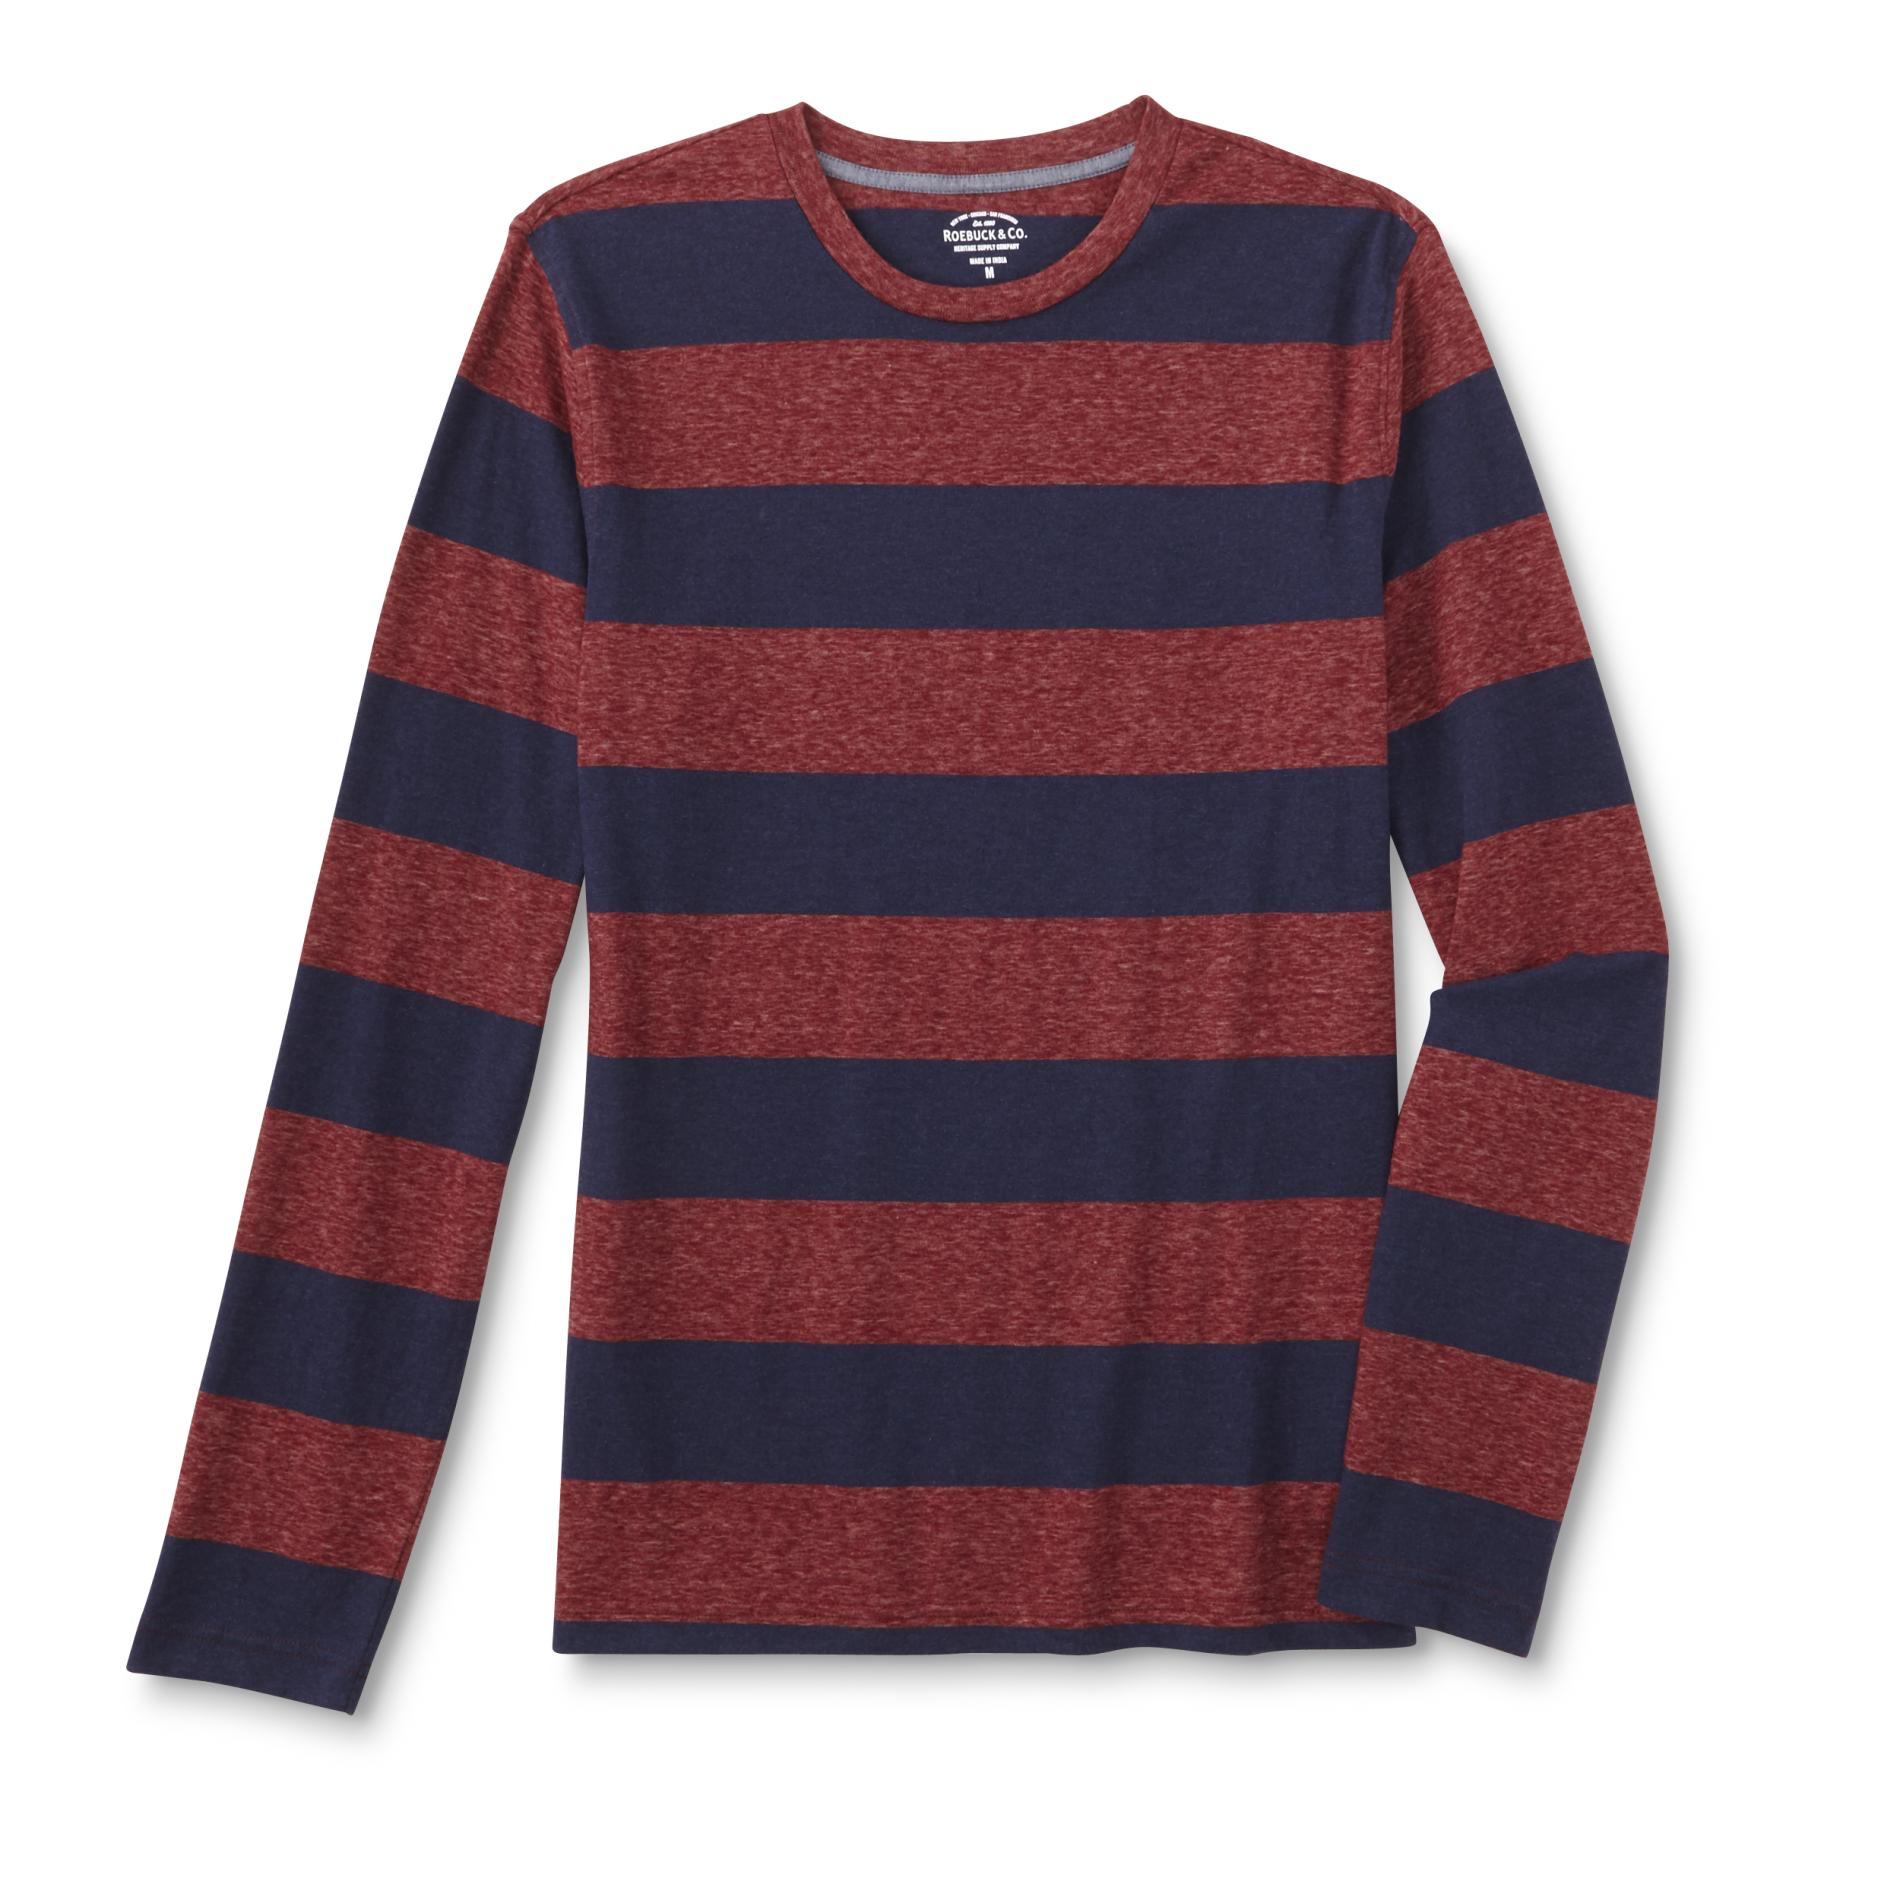 Roebuck & Co. Young Men's Long-Sleeve T-Shirt - Rugby Striped